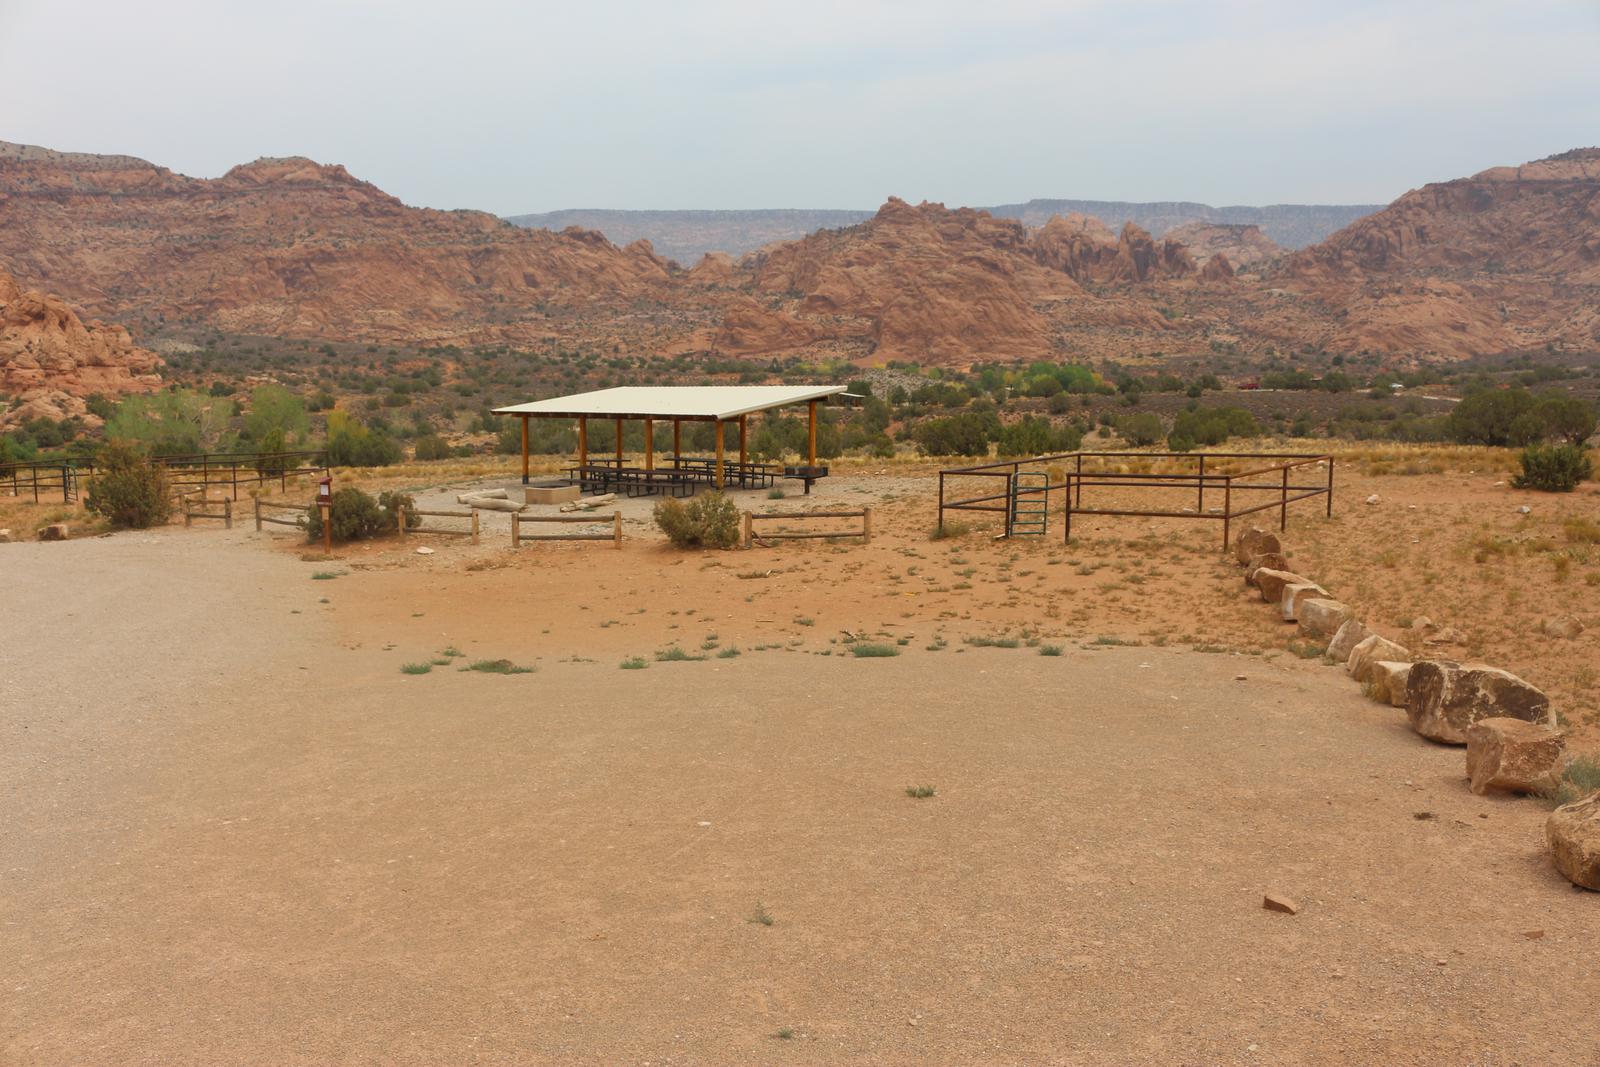 Ken's Lake Group Site A shade shelter, metal fence horse corral, and parking area with undulating, red, slick rock hills on the horizon. 